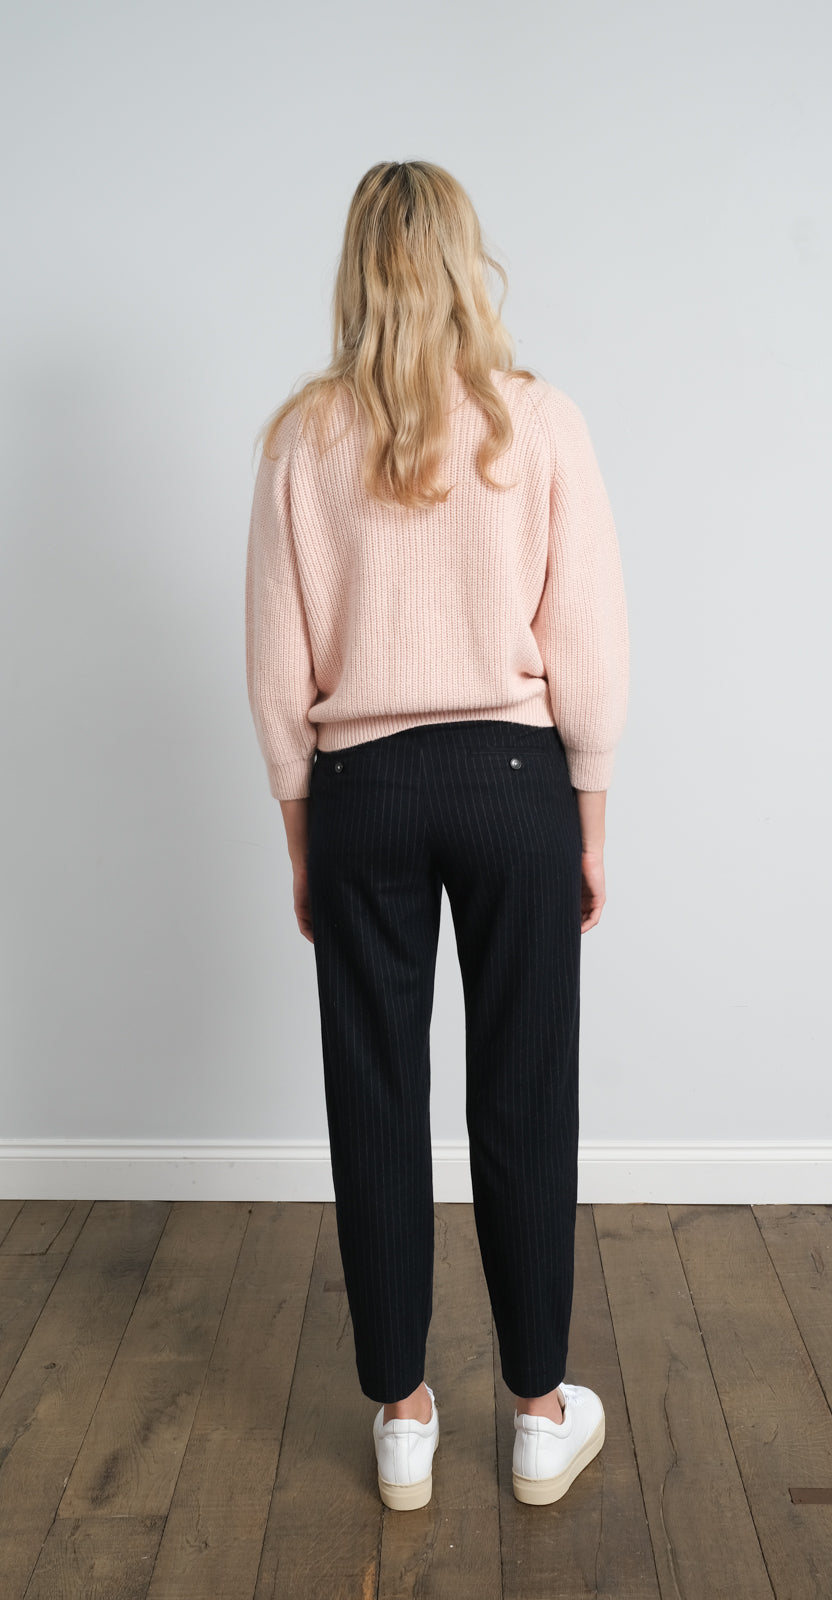 BR Dosany knit cardi in candy